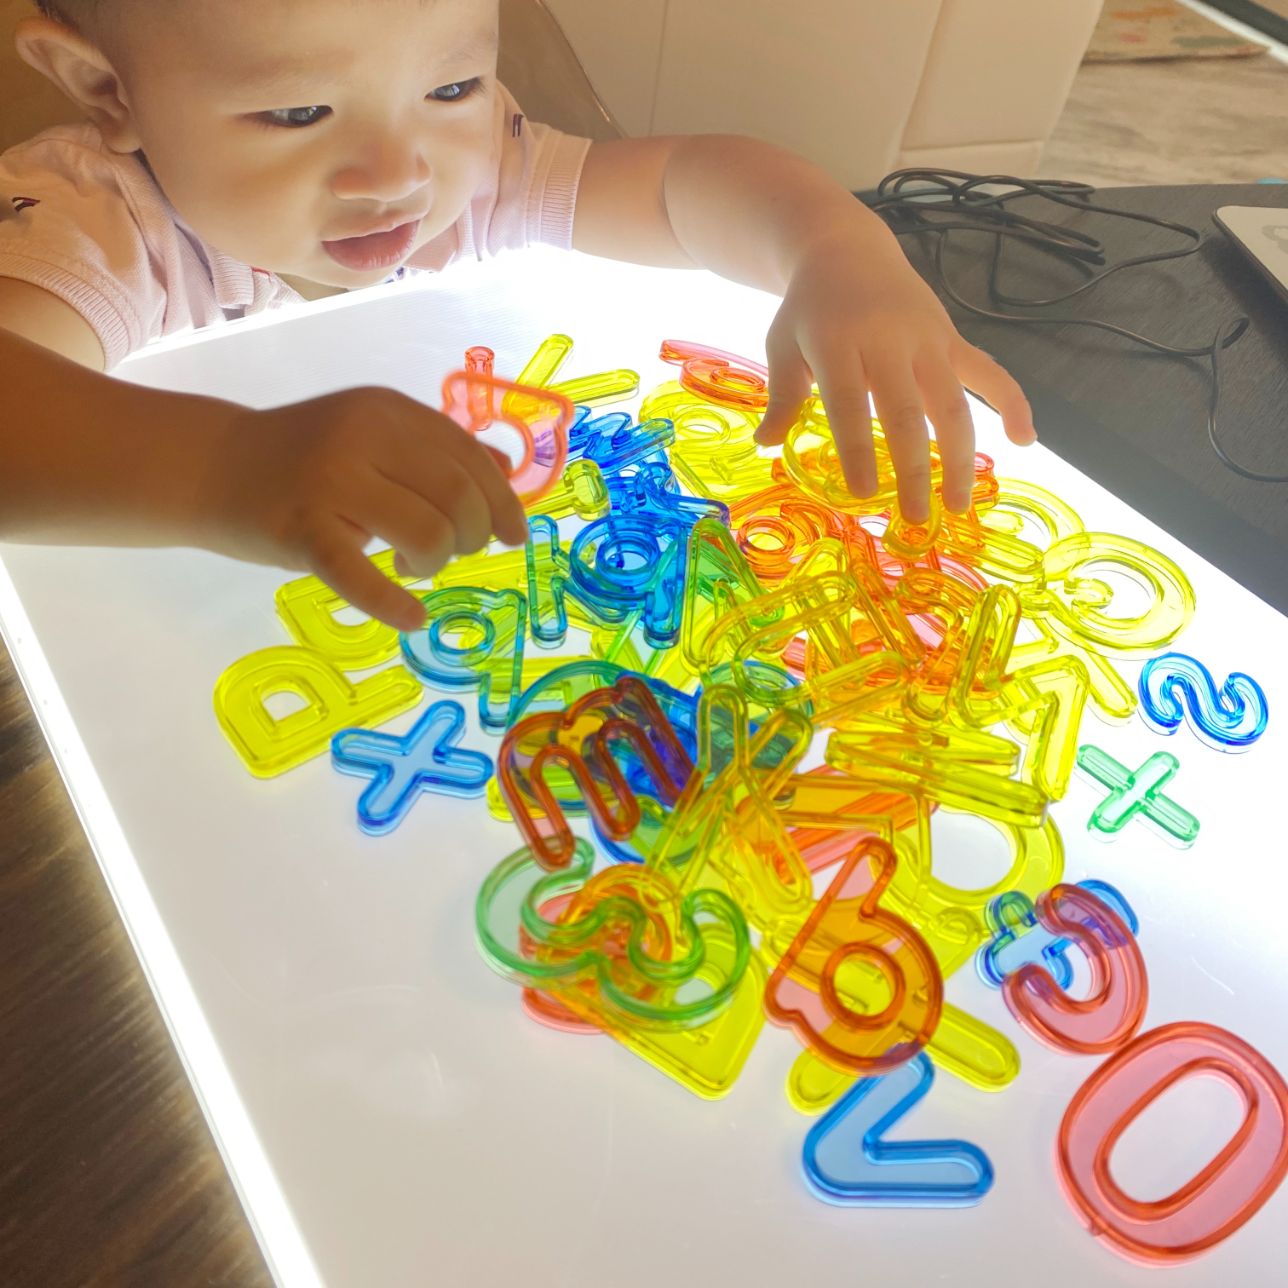 Translucent see through letters and numbers. Early Learning Toy